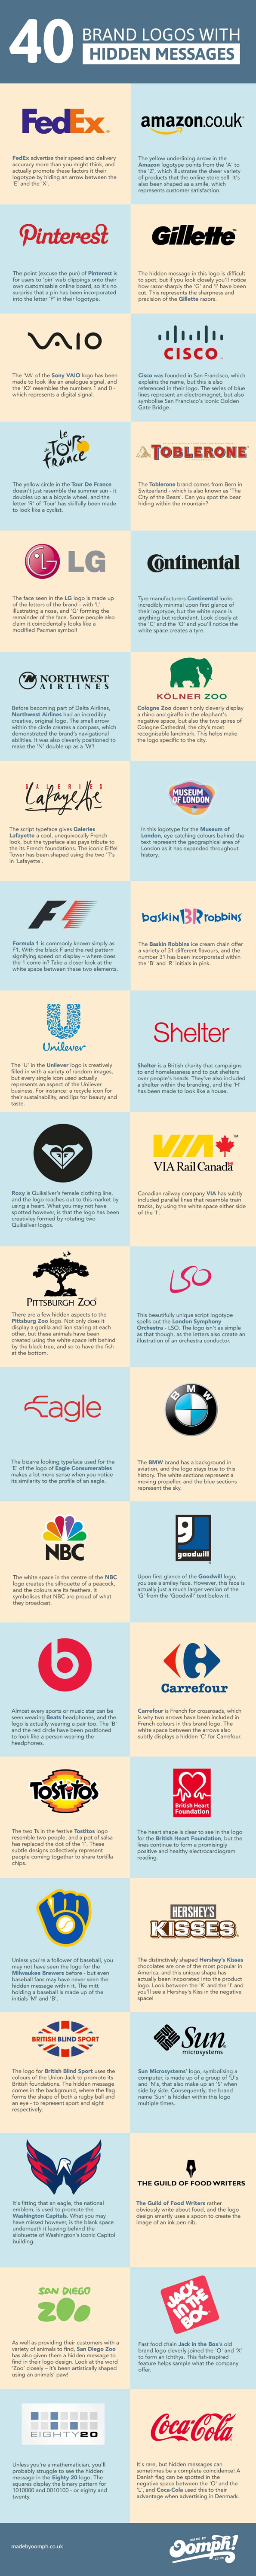 40 Examples of Good Branding Infographic image